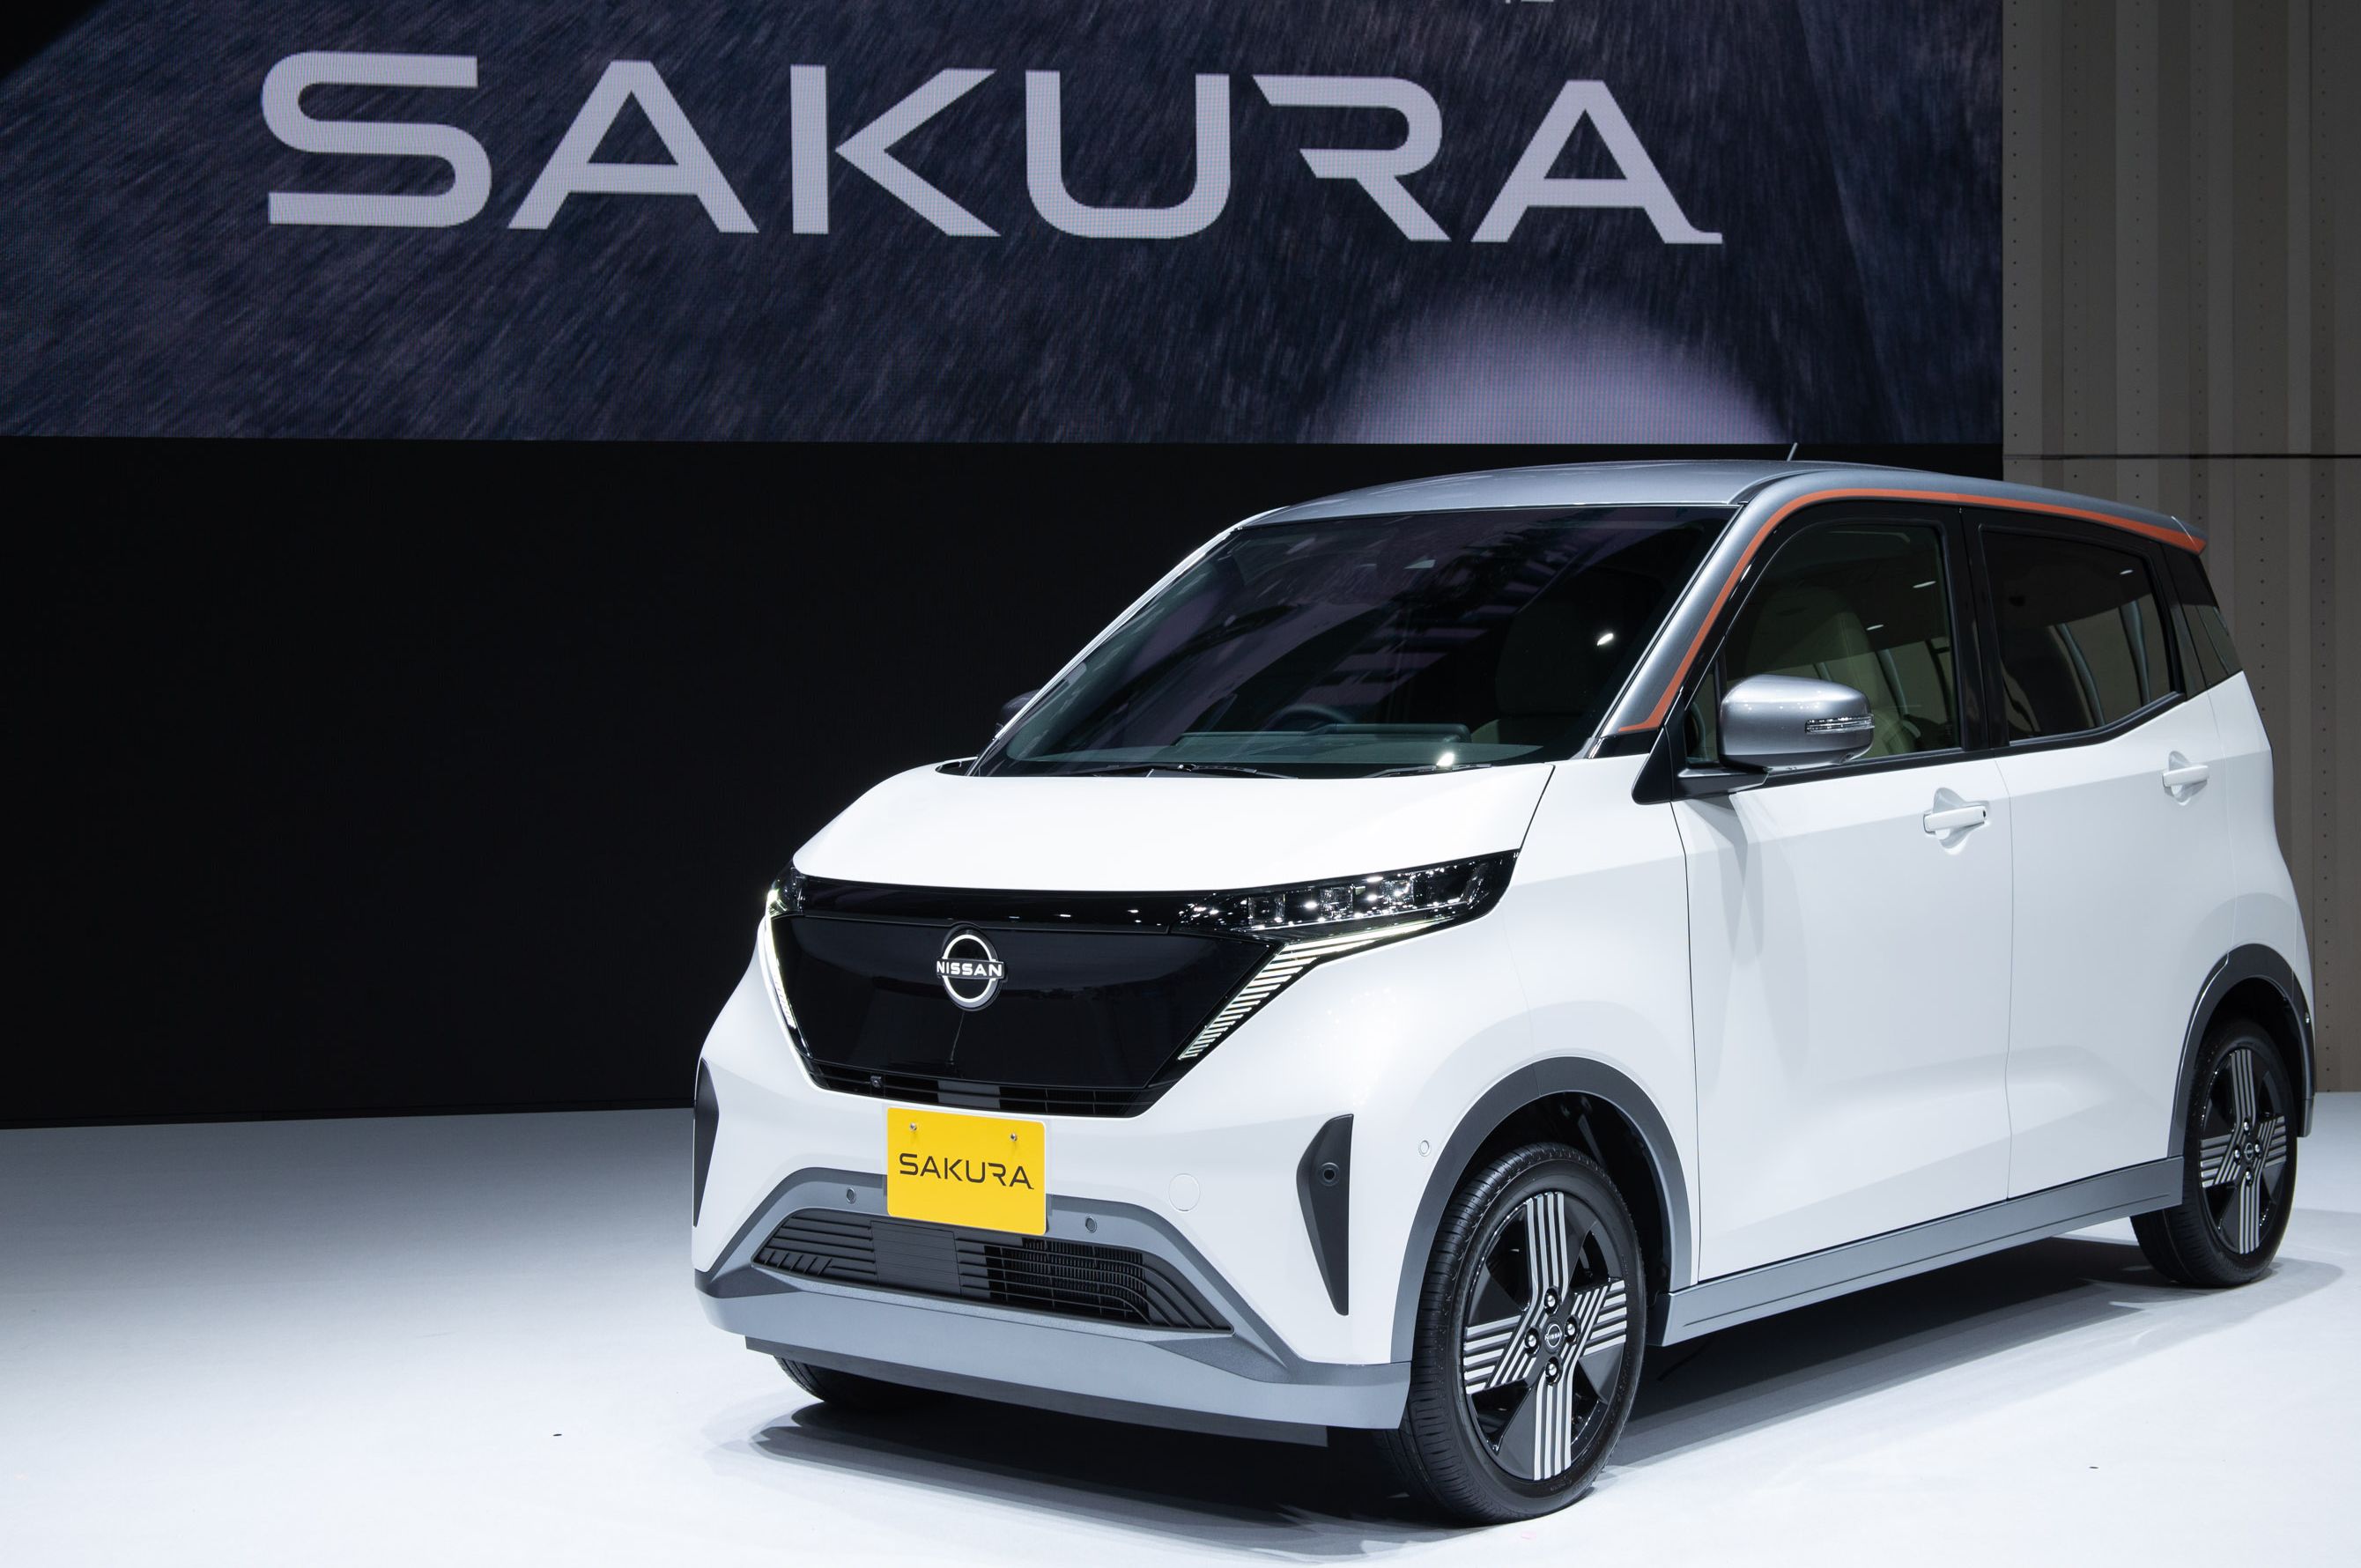 Nissan unveils all-new, all-electric minivehicle in Japan